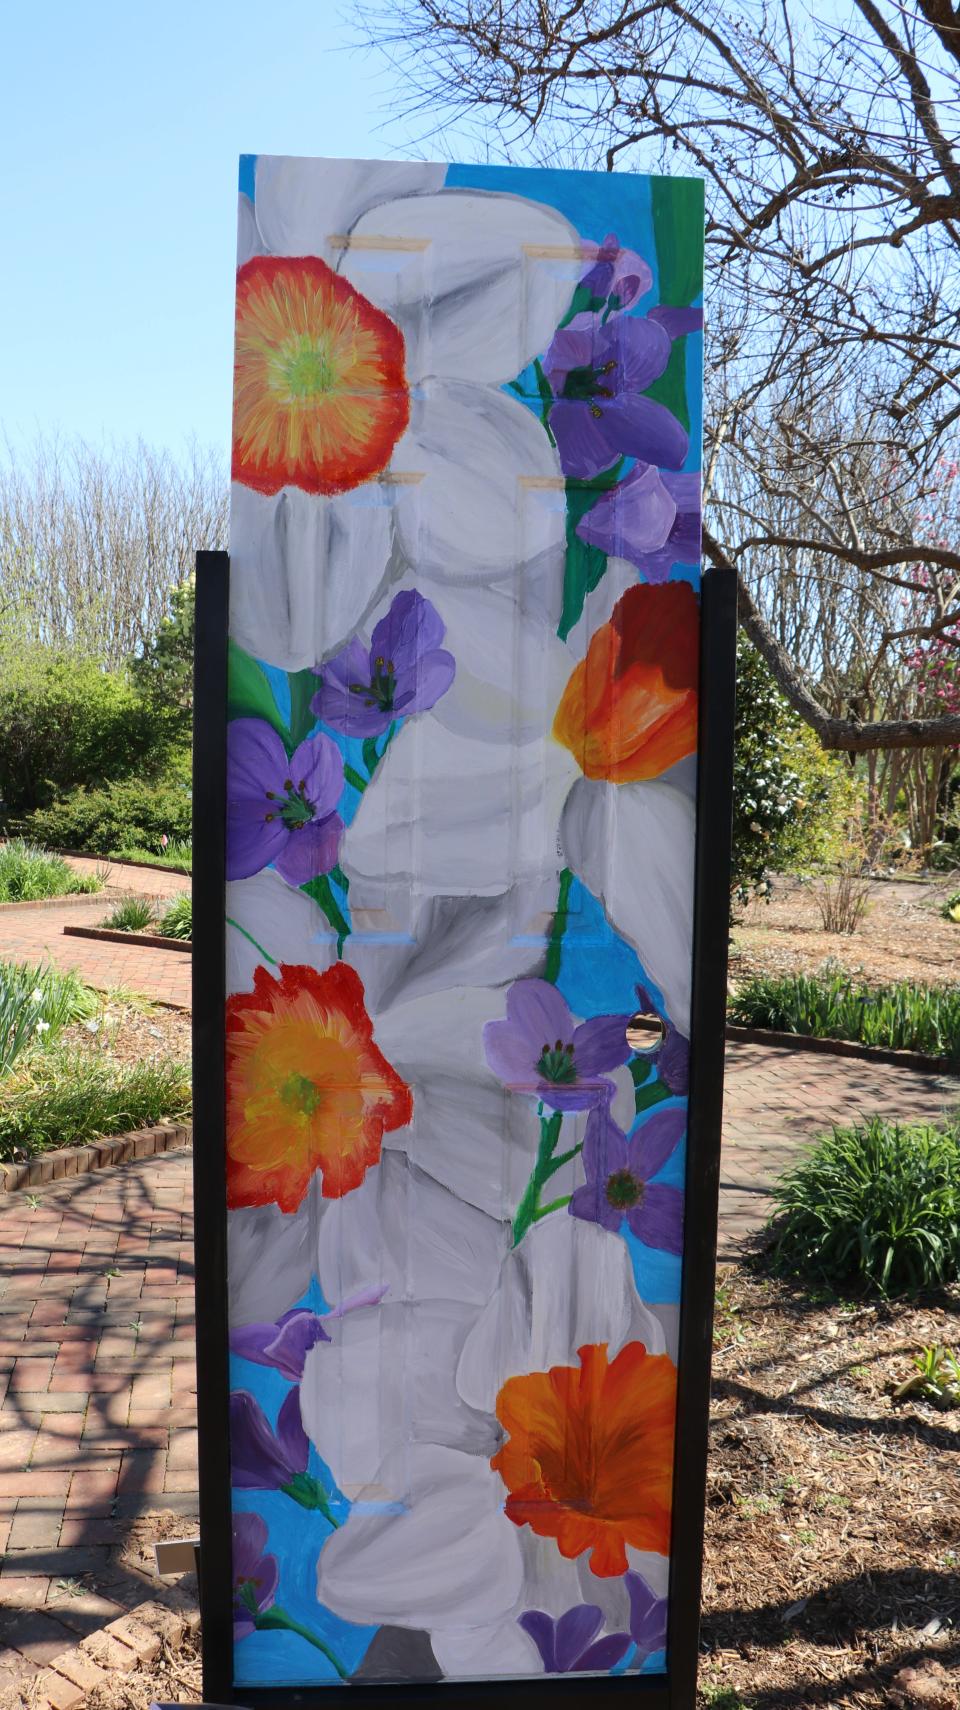 More than two dozen painted doors are on display at Daniel Stowe Botanical Garden as part of a project with Highland School of Technology students.